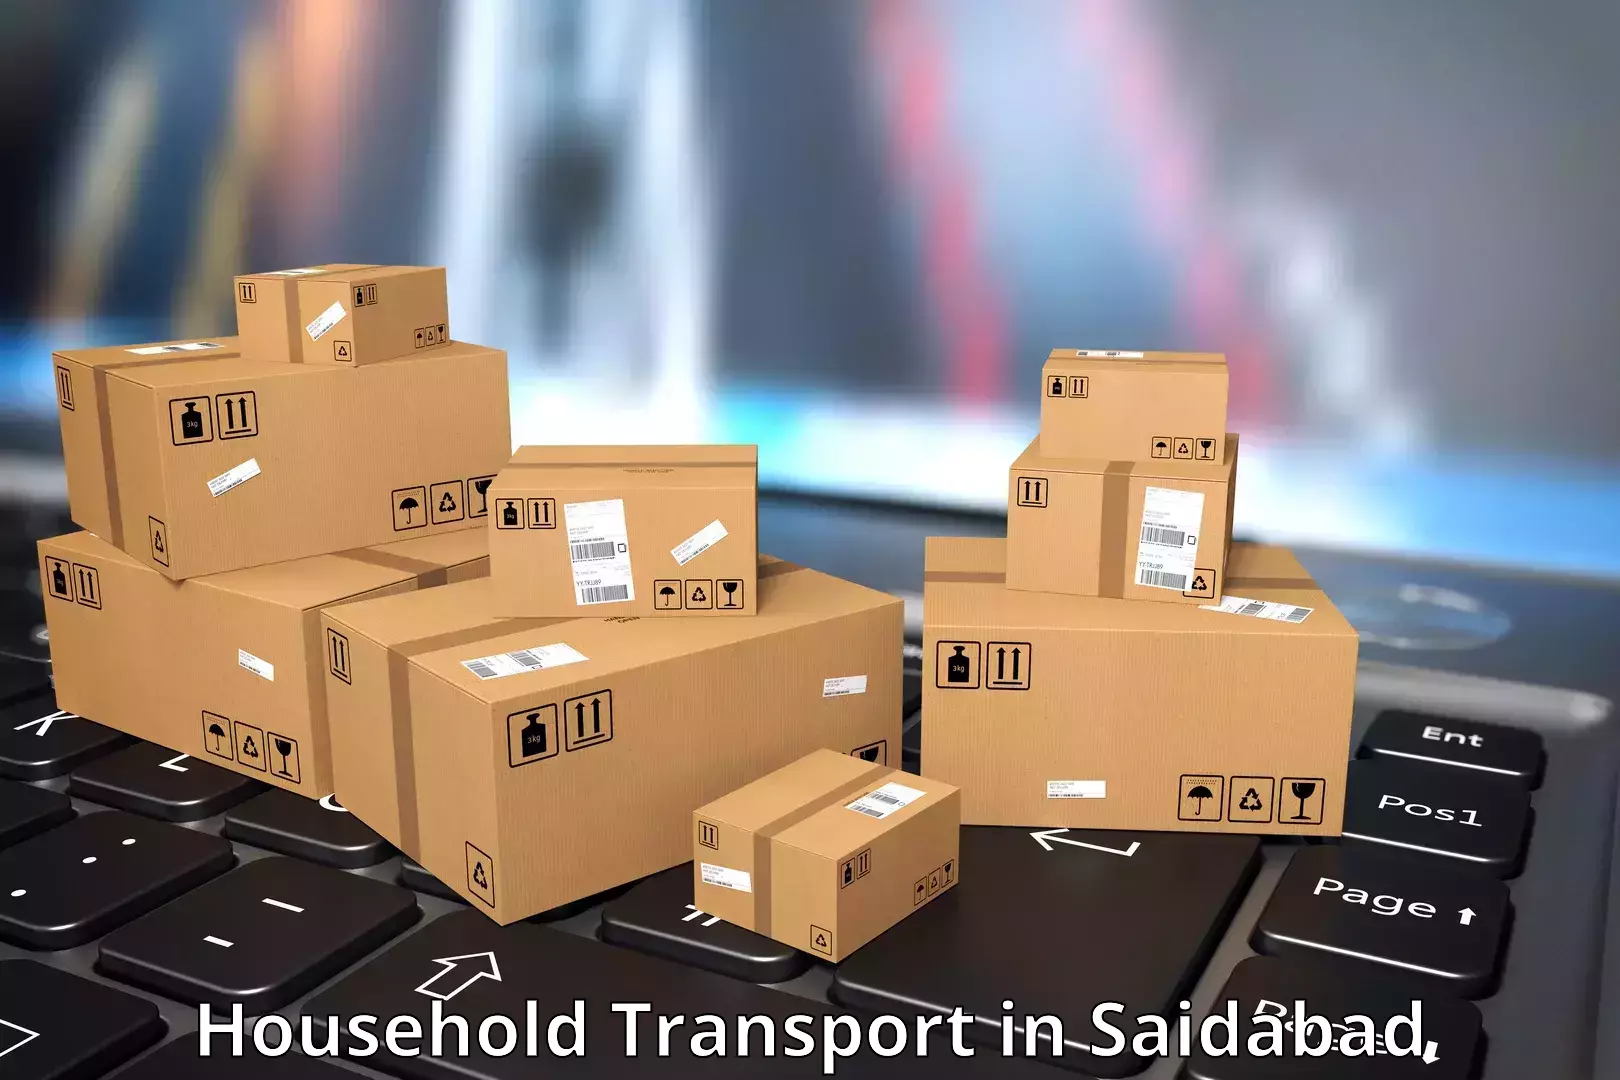 Furniture transport solutions in Saidabad